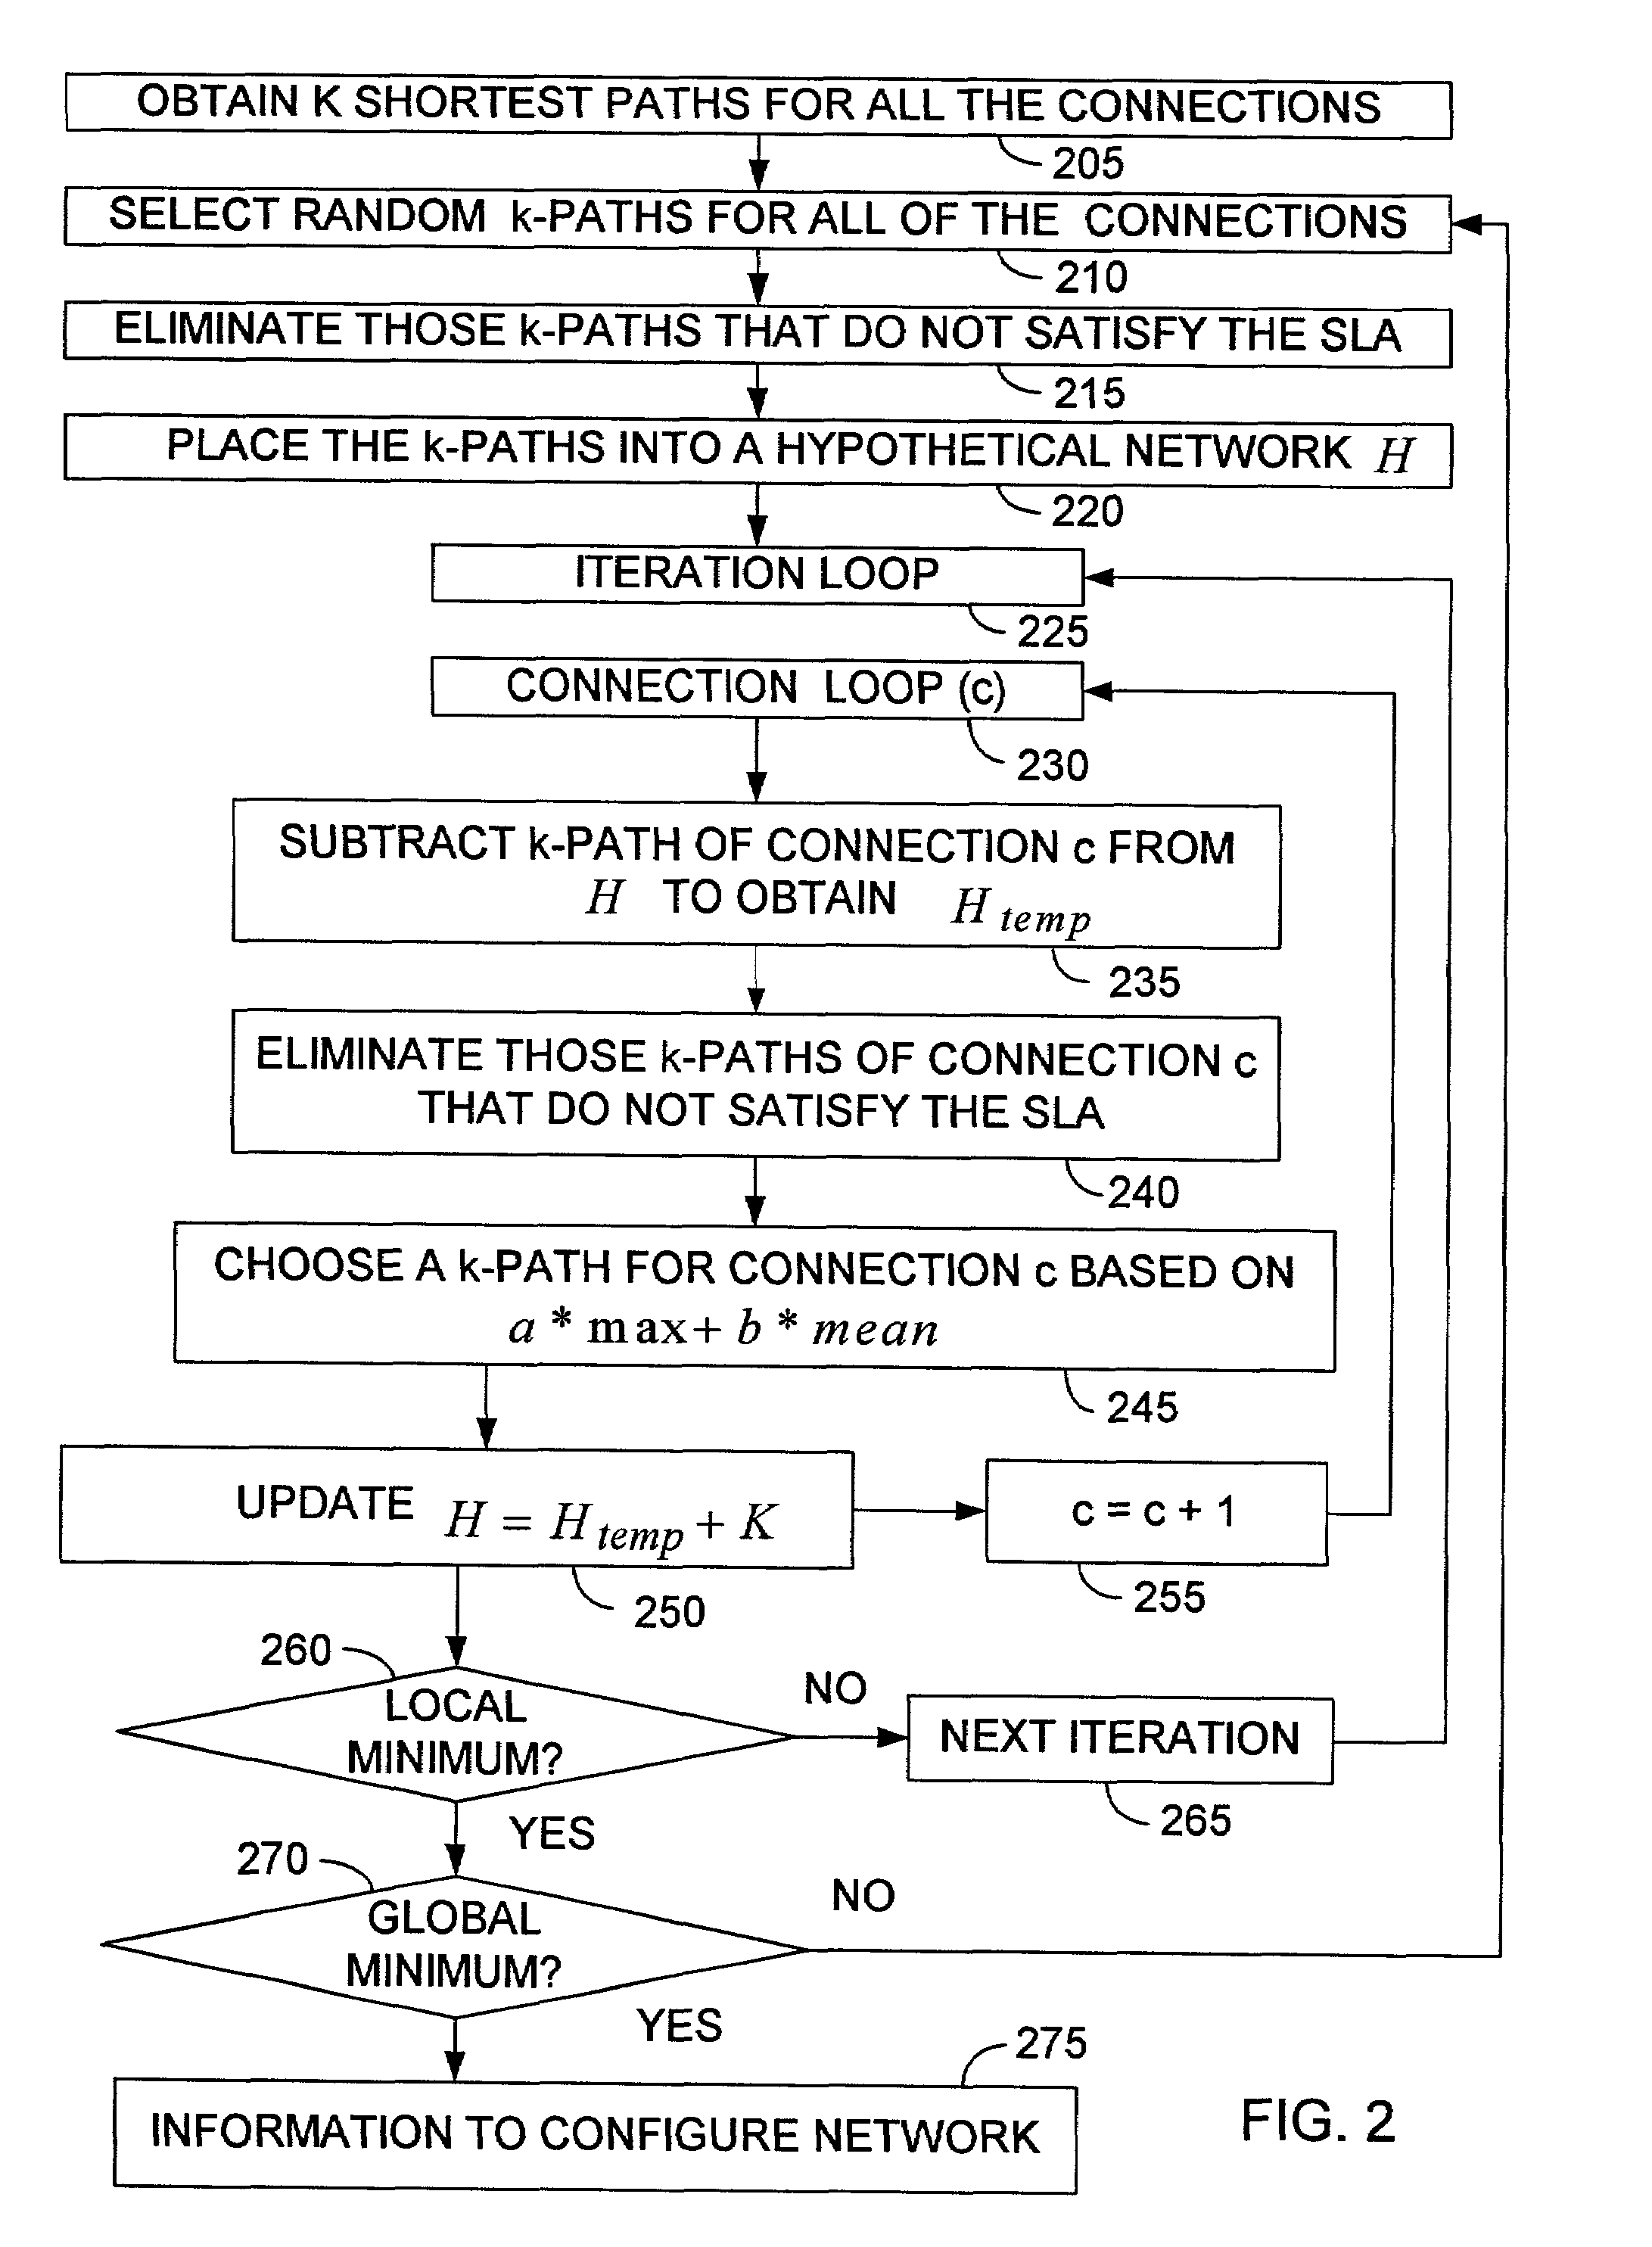 Determination of connection links to configure a virtual private network